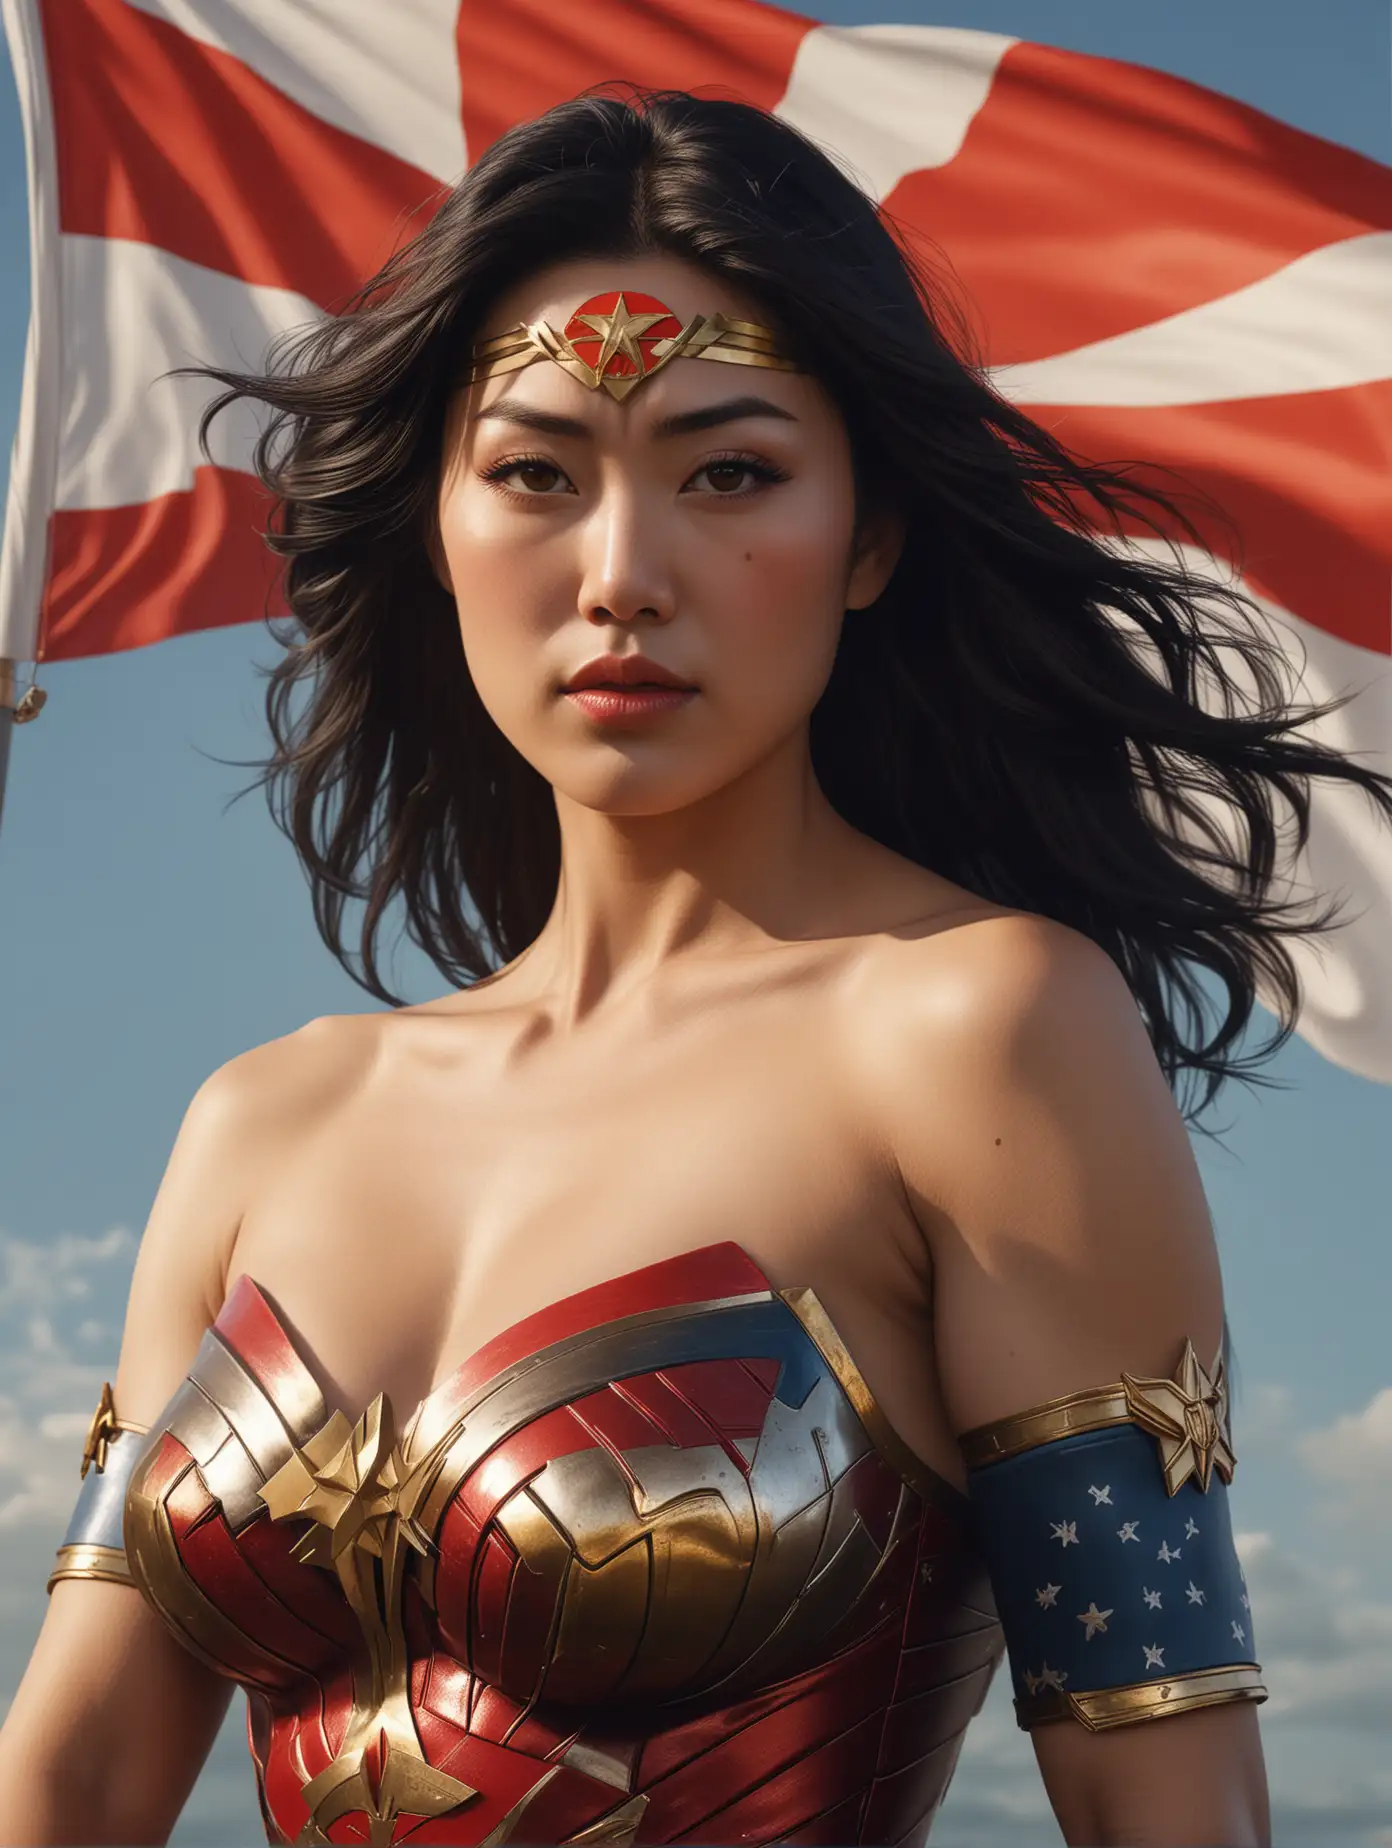 Japanese Wonder Woman with Red Sun Flag in Heroic Pose